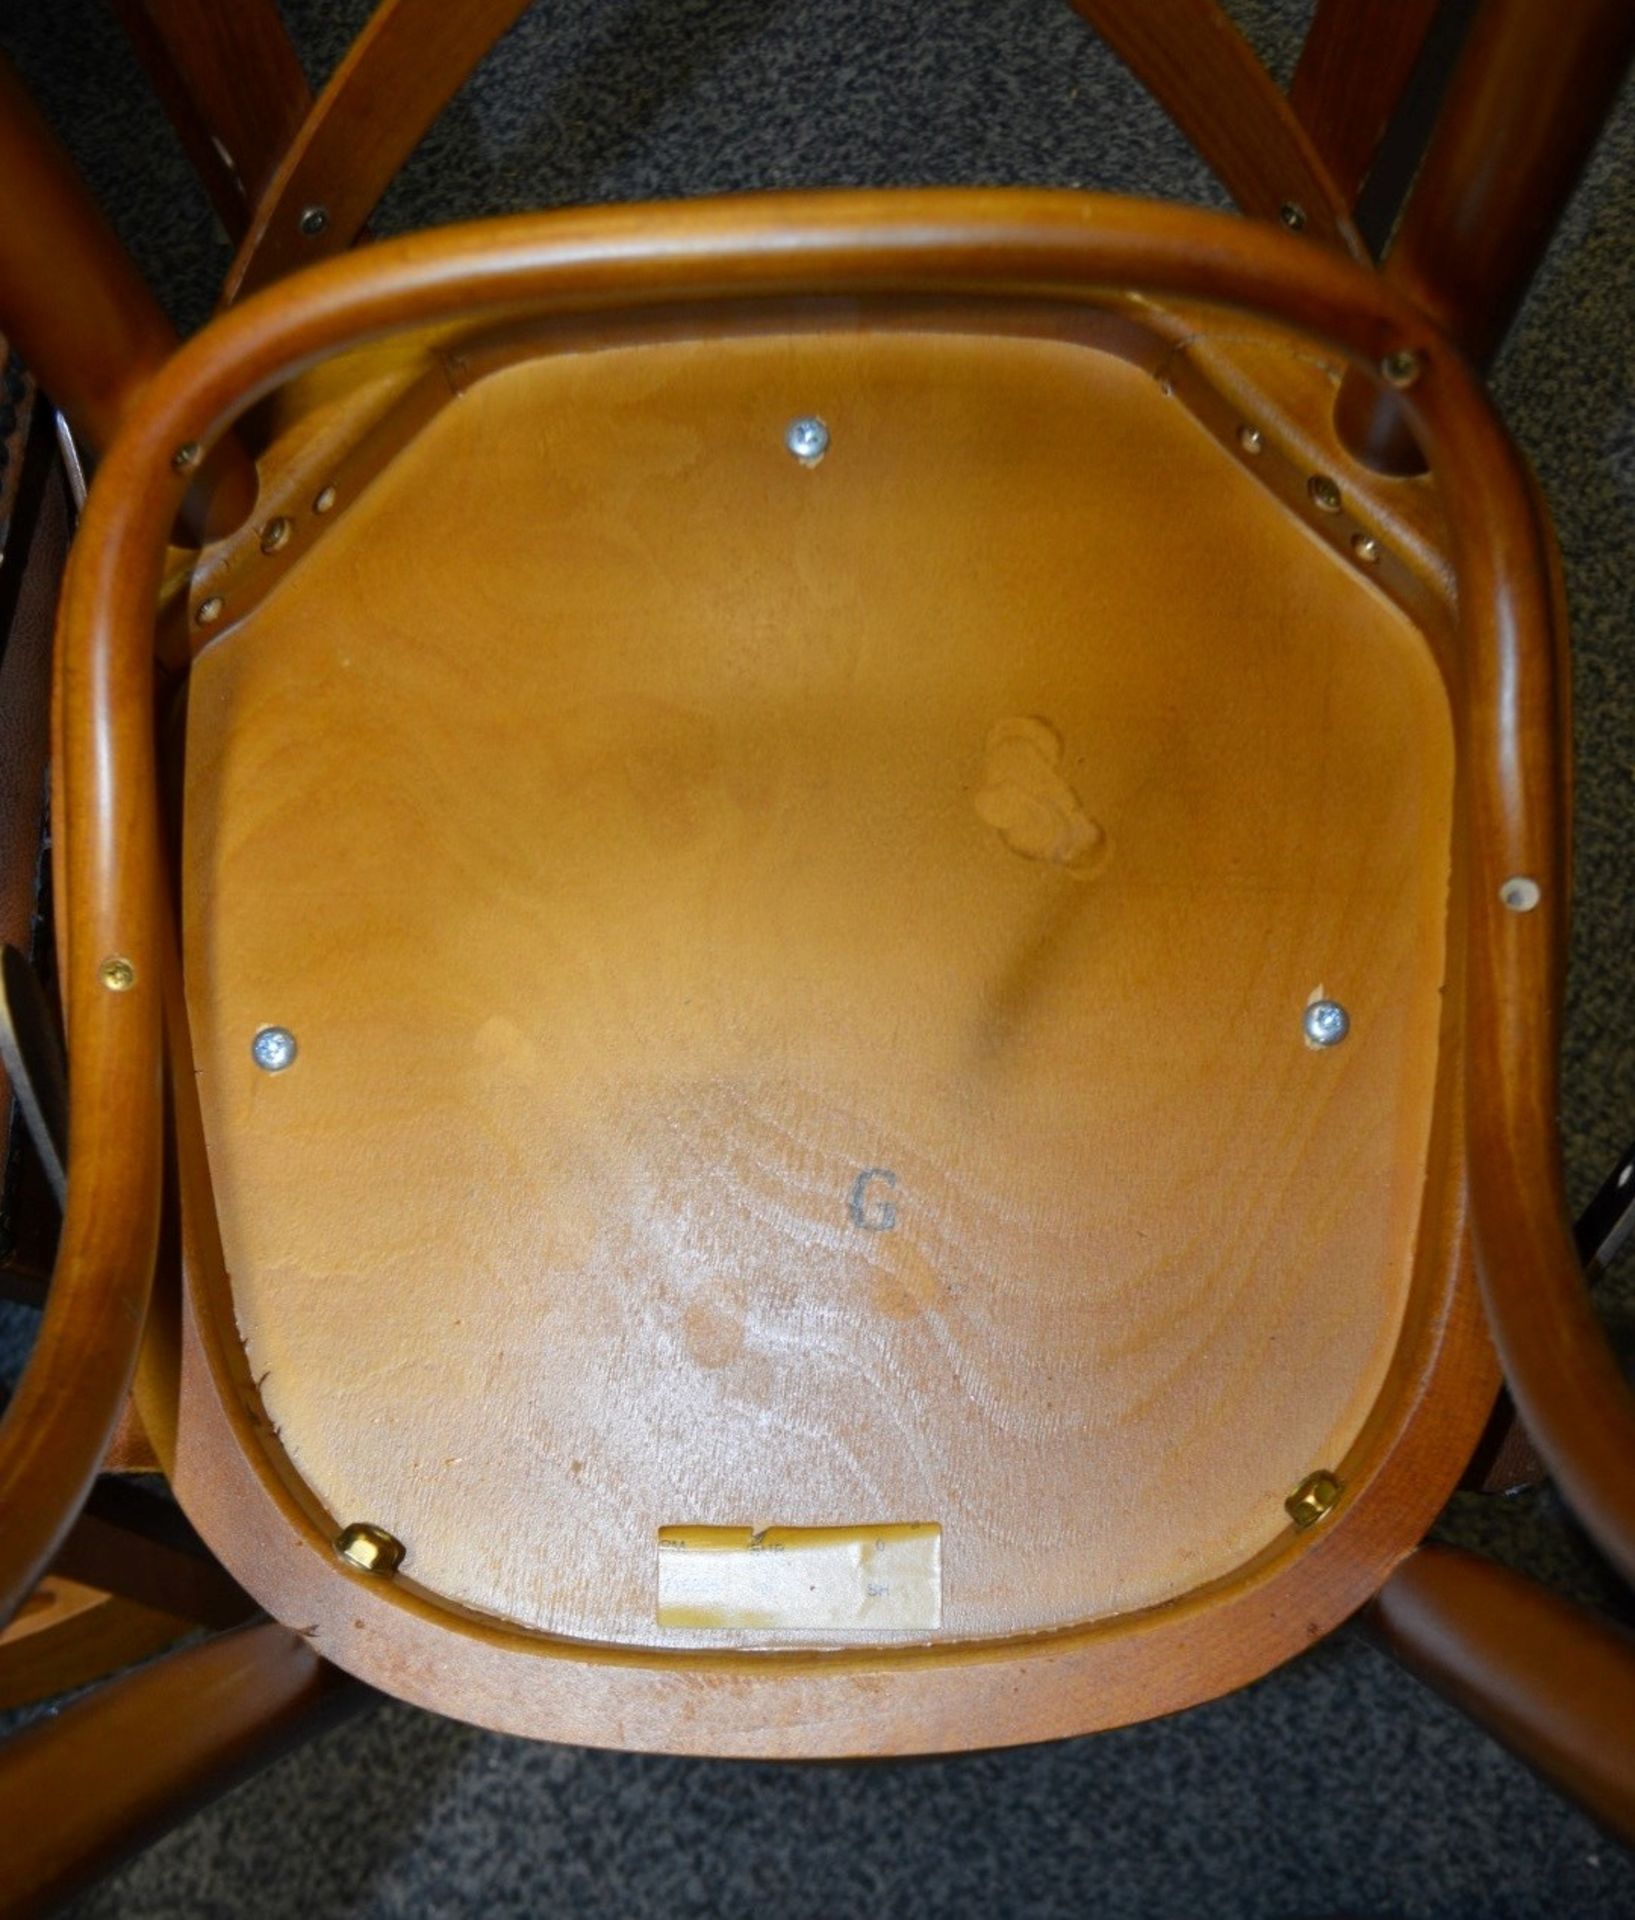 4 x Assorted Cross-Back Dining Chairs - Dimensions: W43 x D40 x H82 x Seat 46cm - Used - Ref614 - - Image 6 of 7